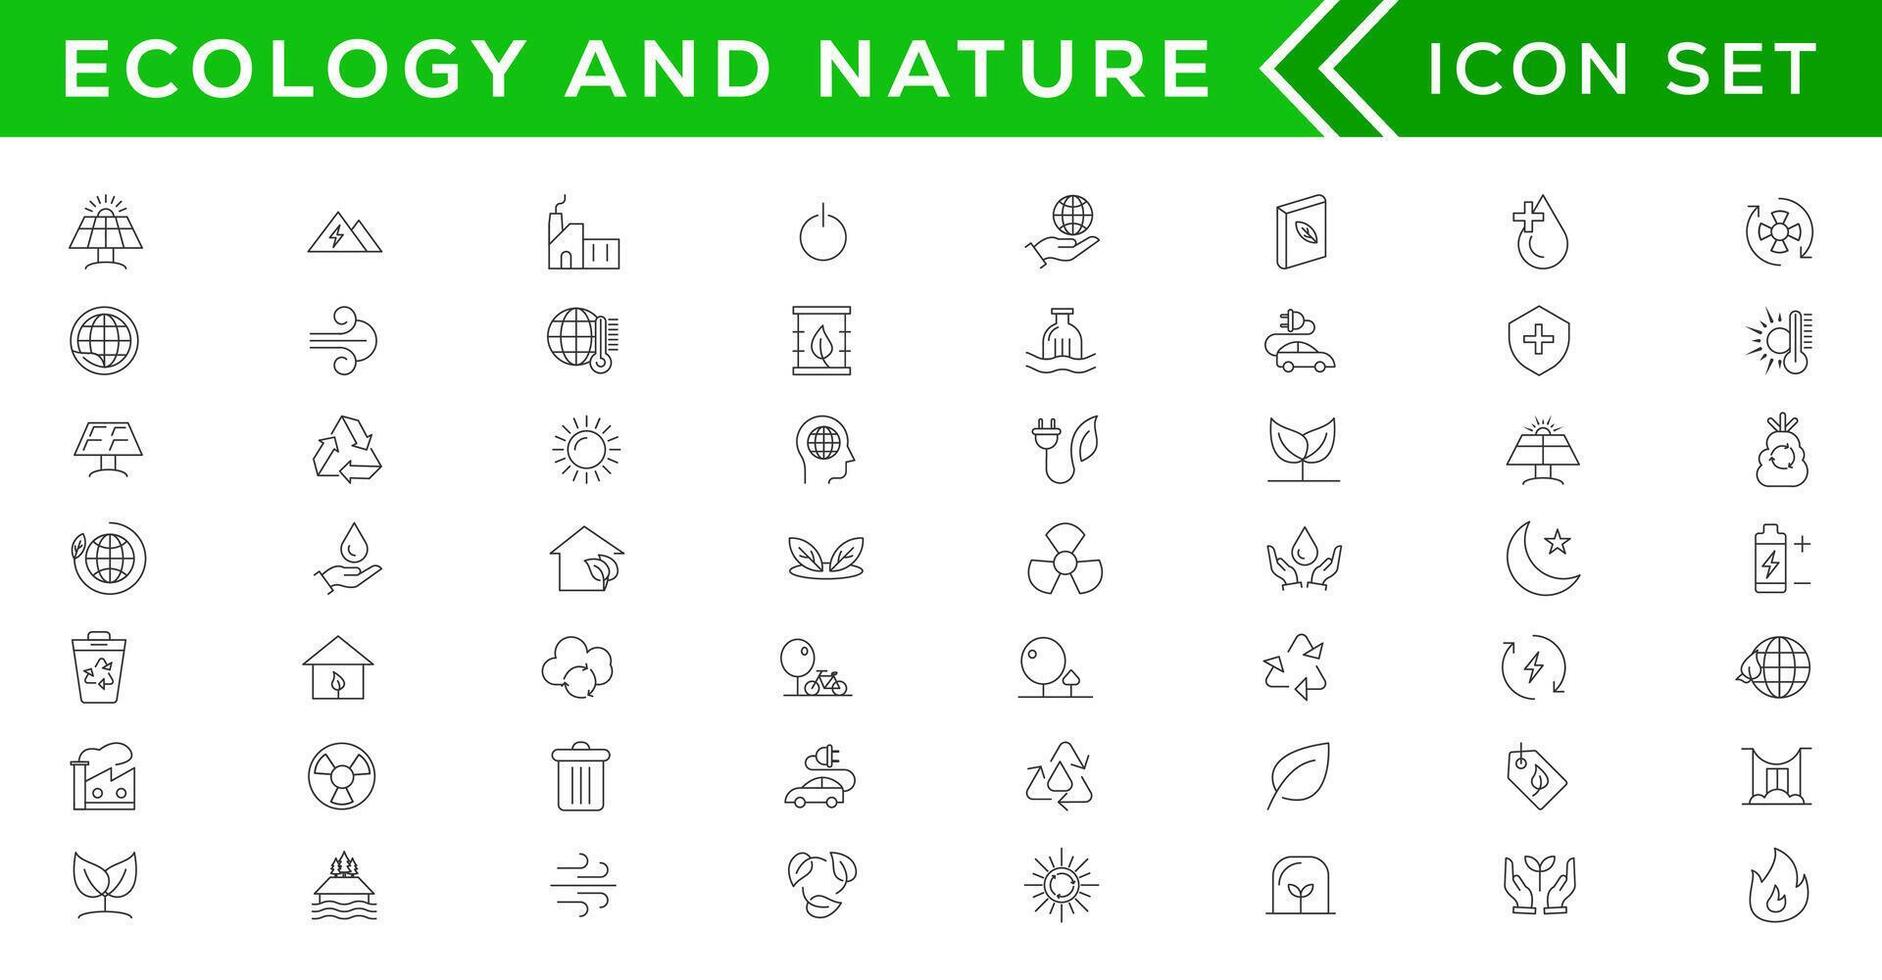 Mega set of ecology icons in trendy line style. Big set Icons collection vector